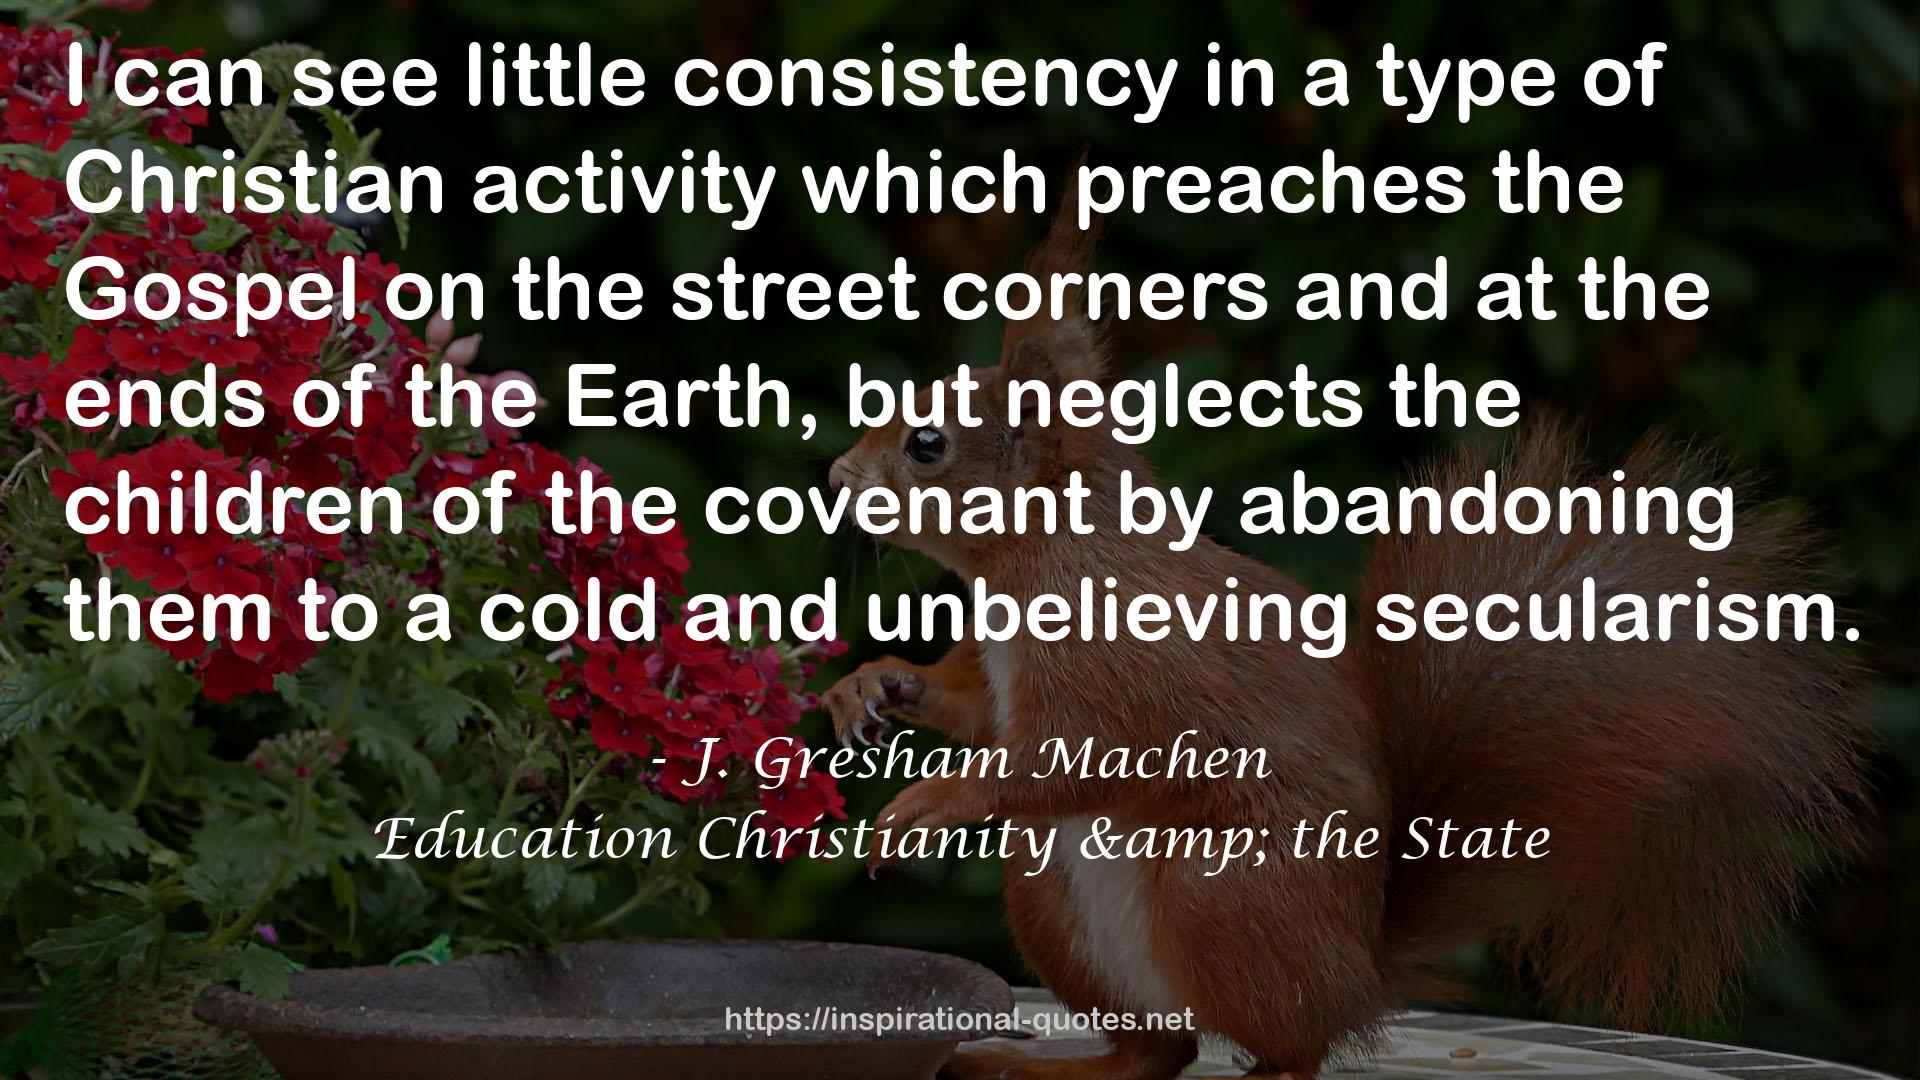 Education Christianity & the State QUOTES